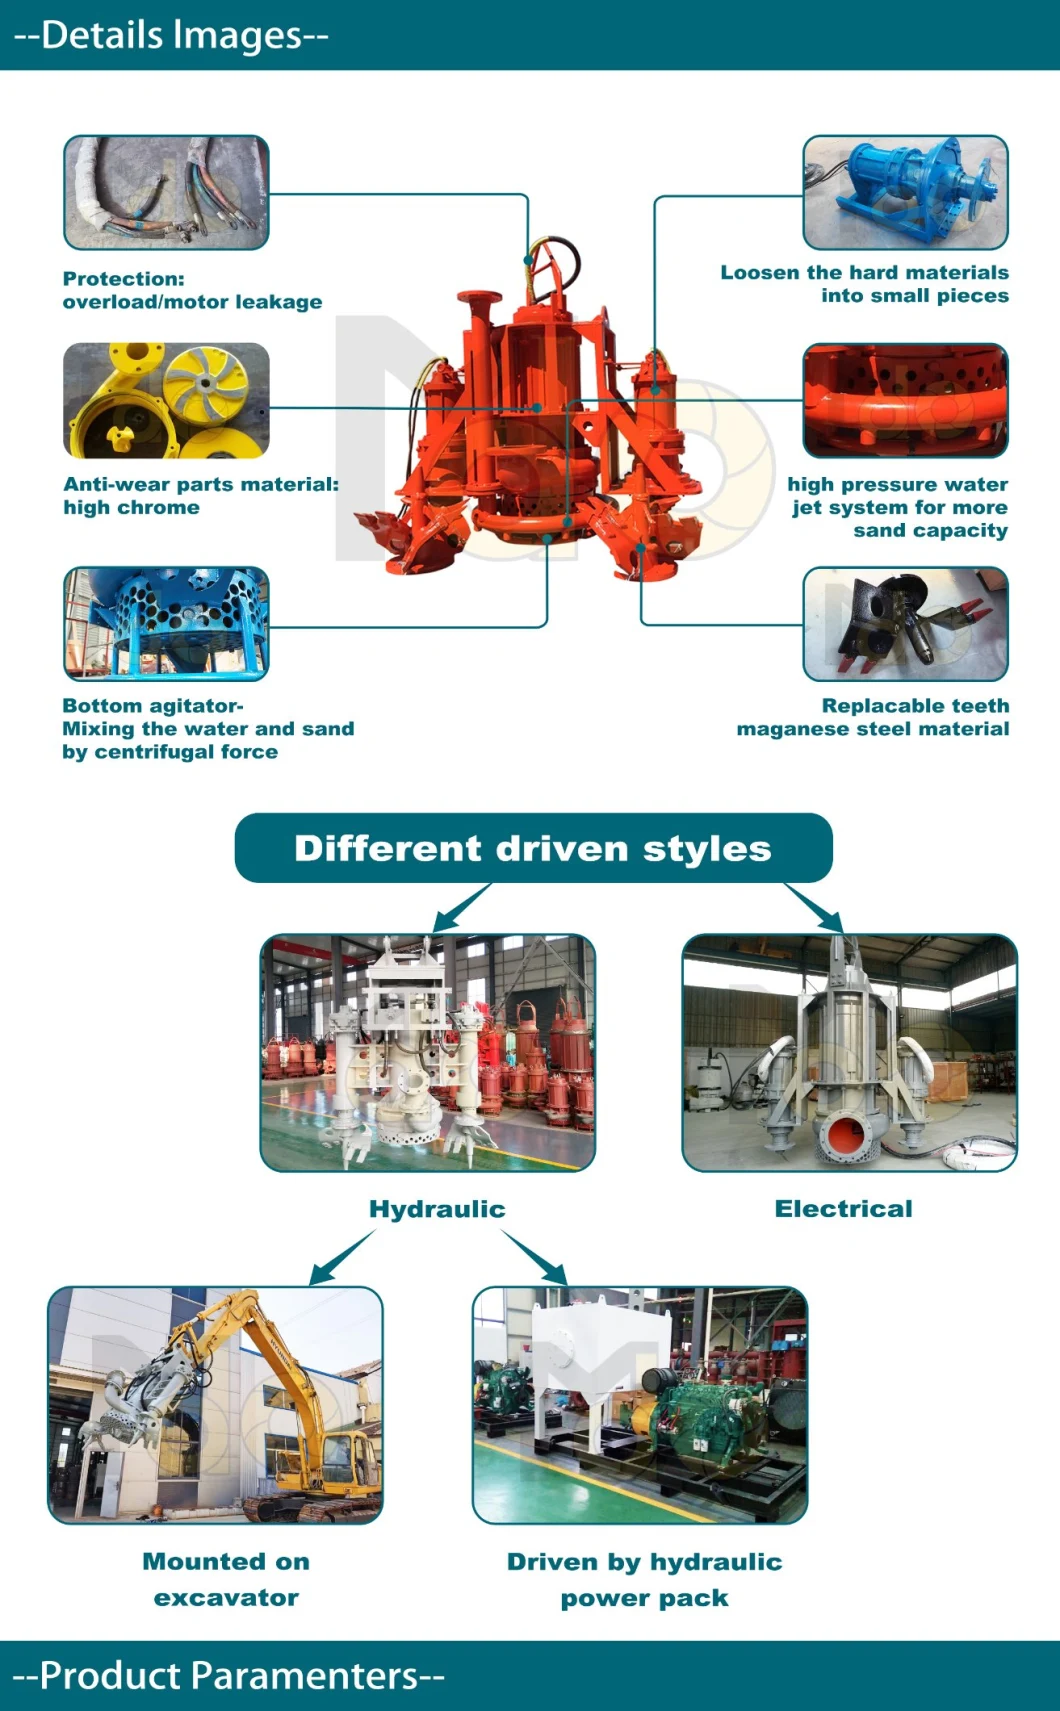 The Best Hydraulic Electric Driven Huge Heavy Duty Submersible Slurry Pump for Mining